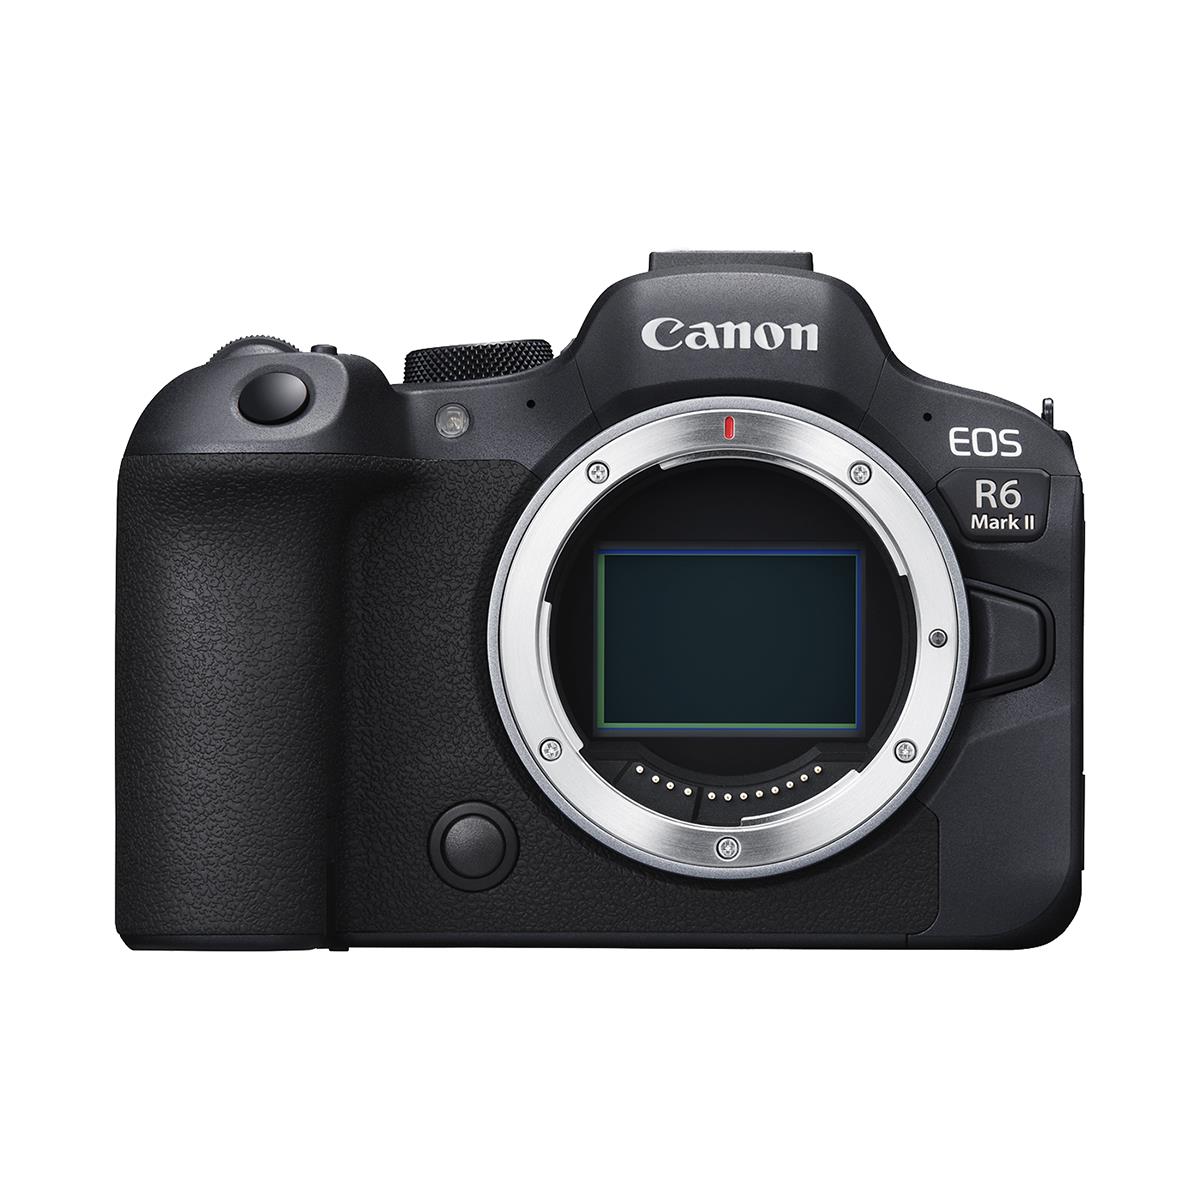 Image of Canon EOS R6 MKII Mirrorless Camera Body w/Stop Motion Animation Firmware